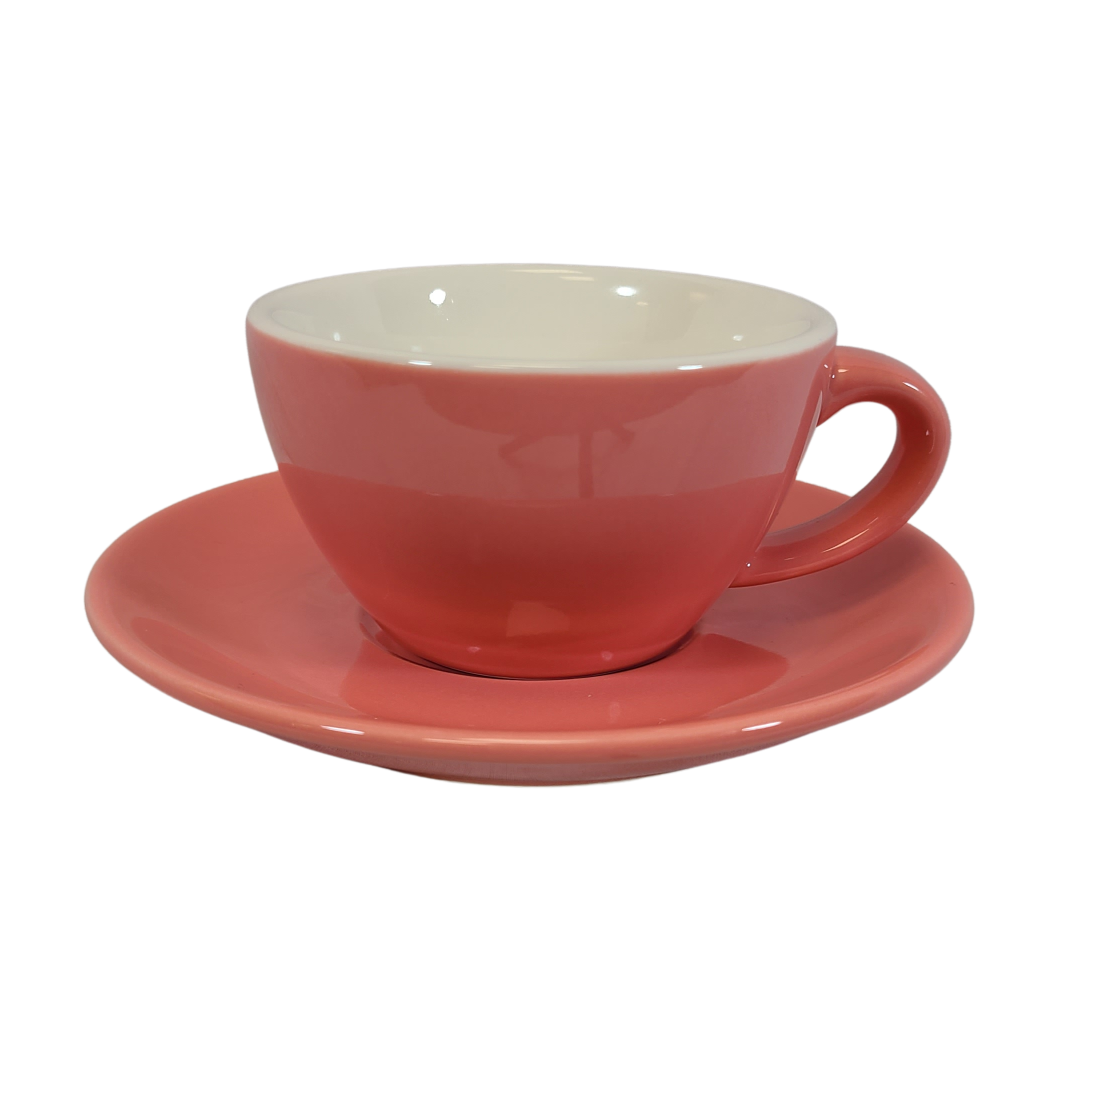 Coffee Addicts commercial ceramic cup with saucer in glossy pink cappuccino cortado cup 5oz 150ml